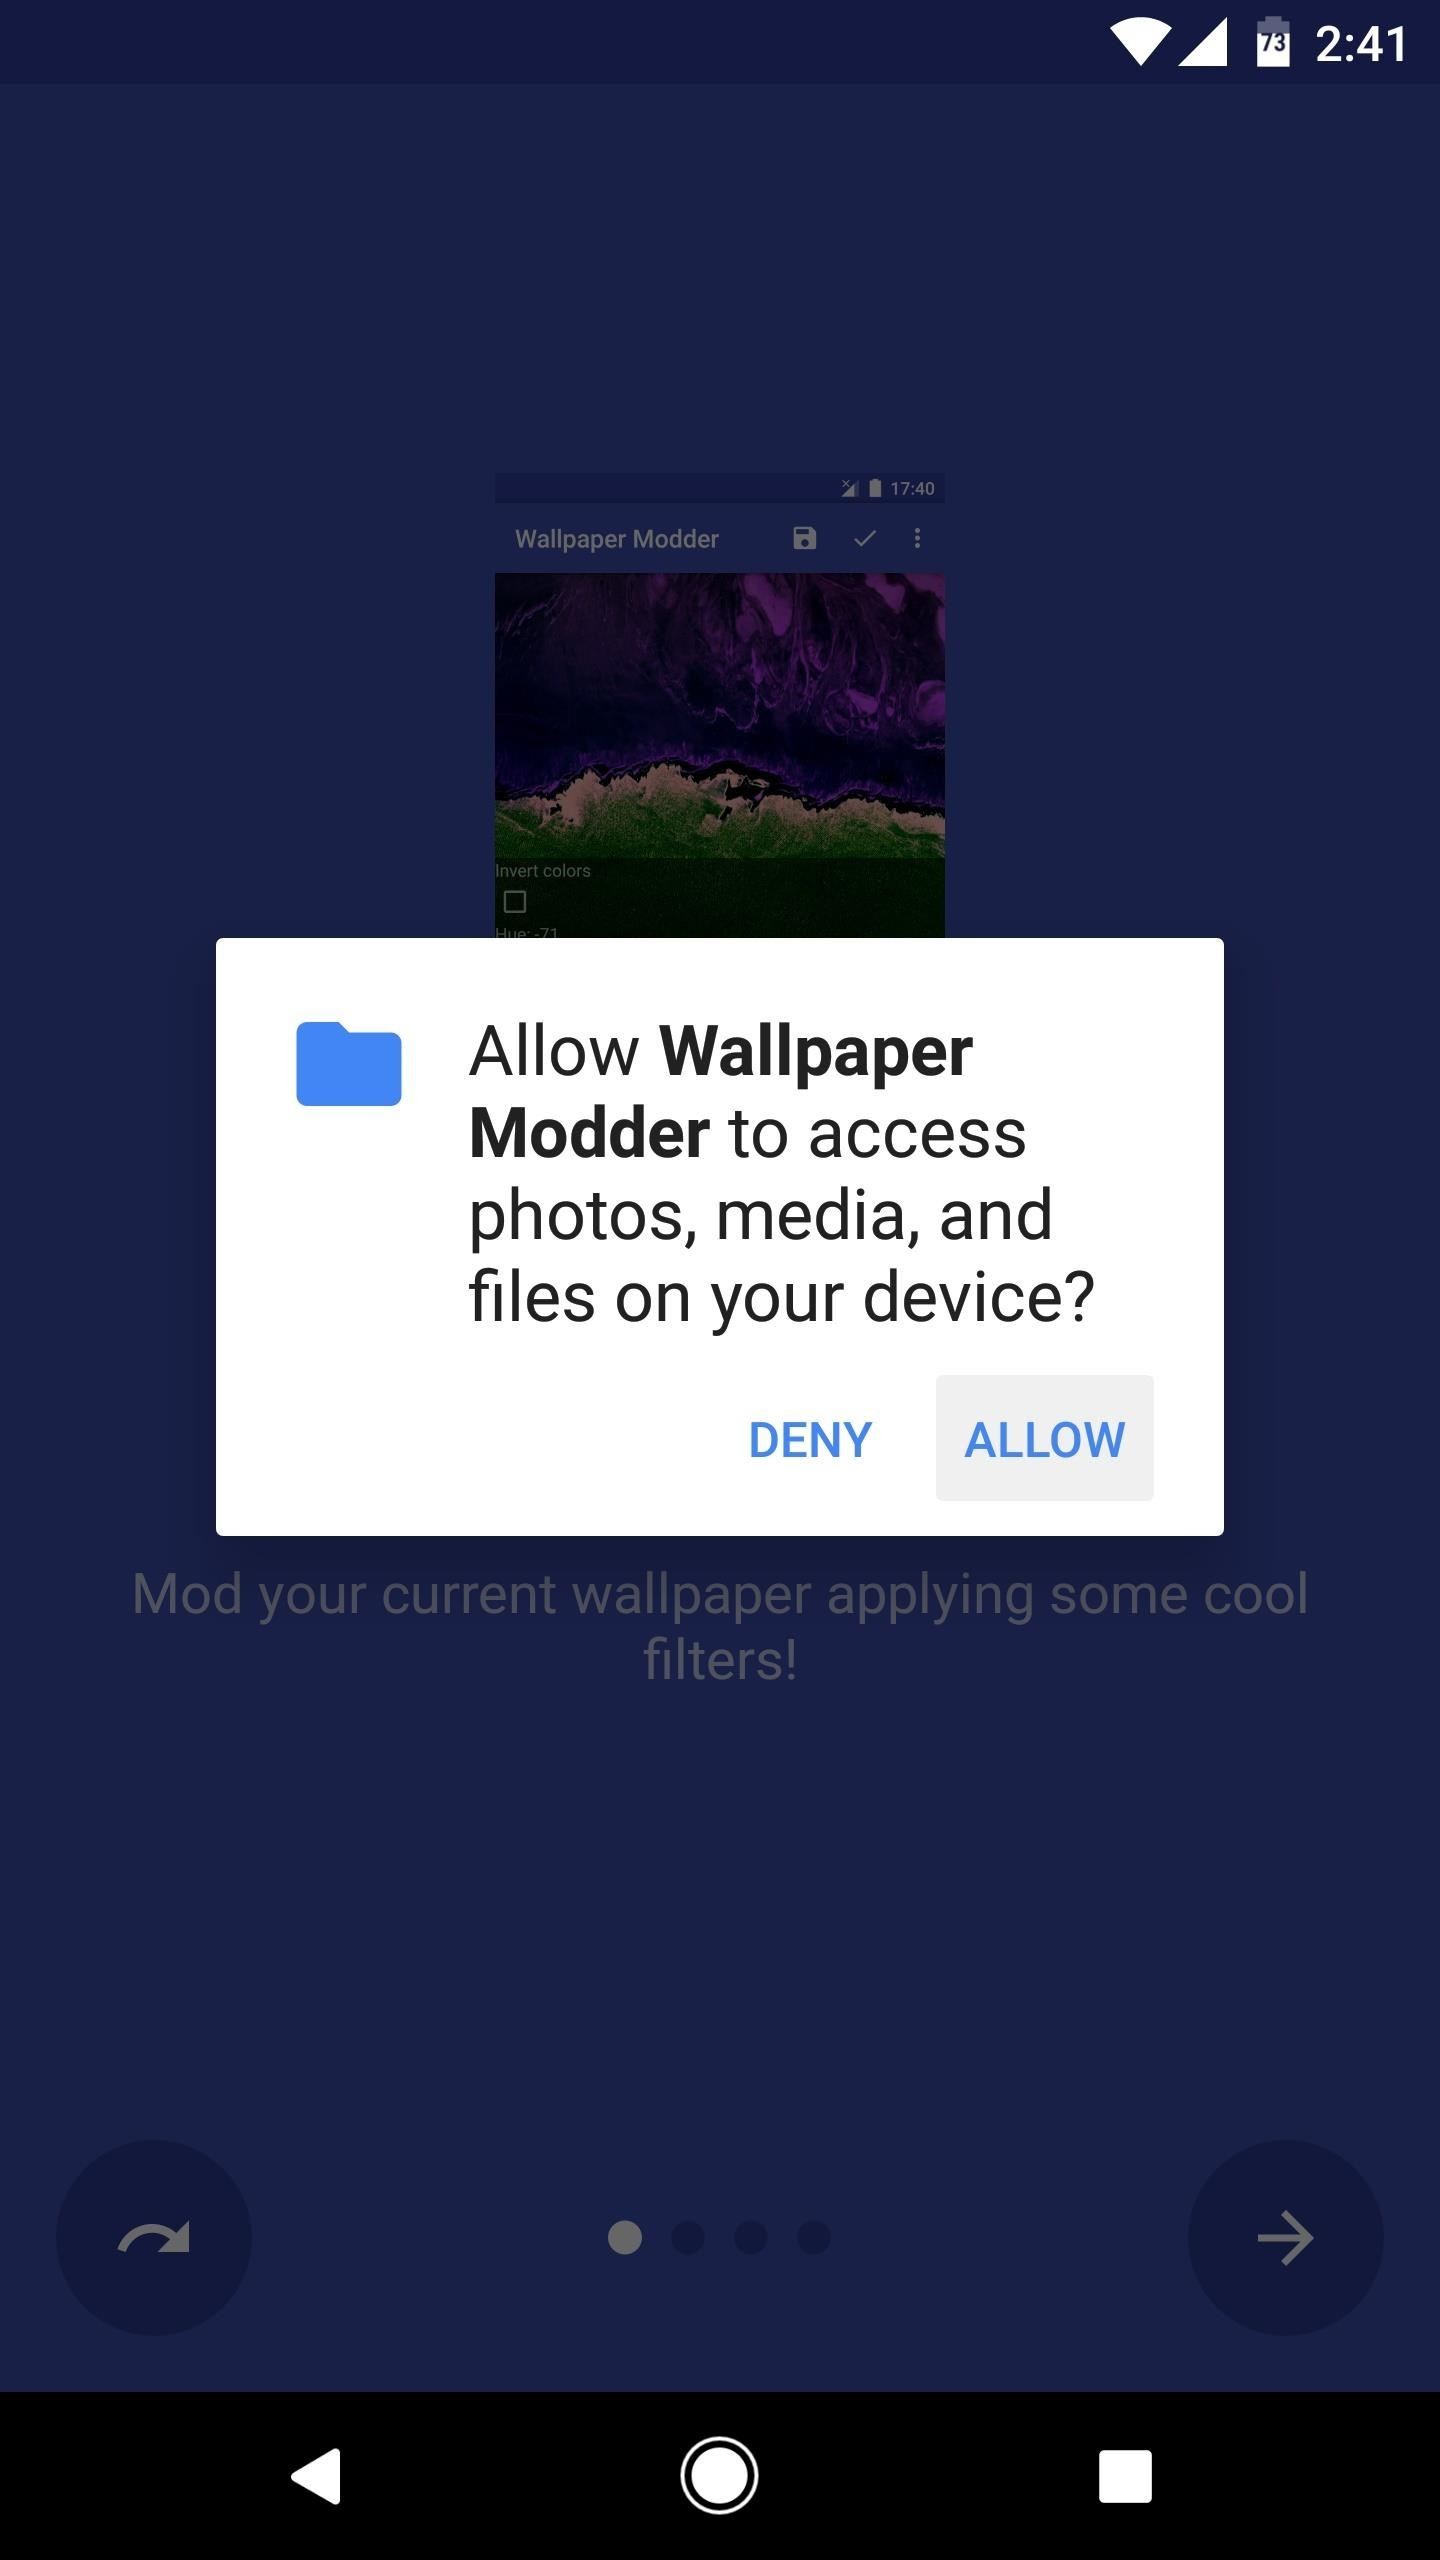 1440x2560 ... permission request so that Wallpaper Modder can access your home screen  image files. From there, you'll get a guided tour showing how the app  works, ...